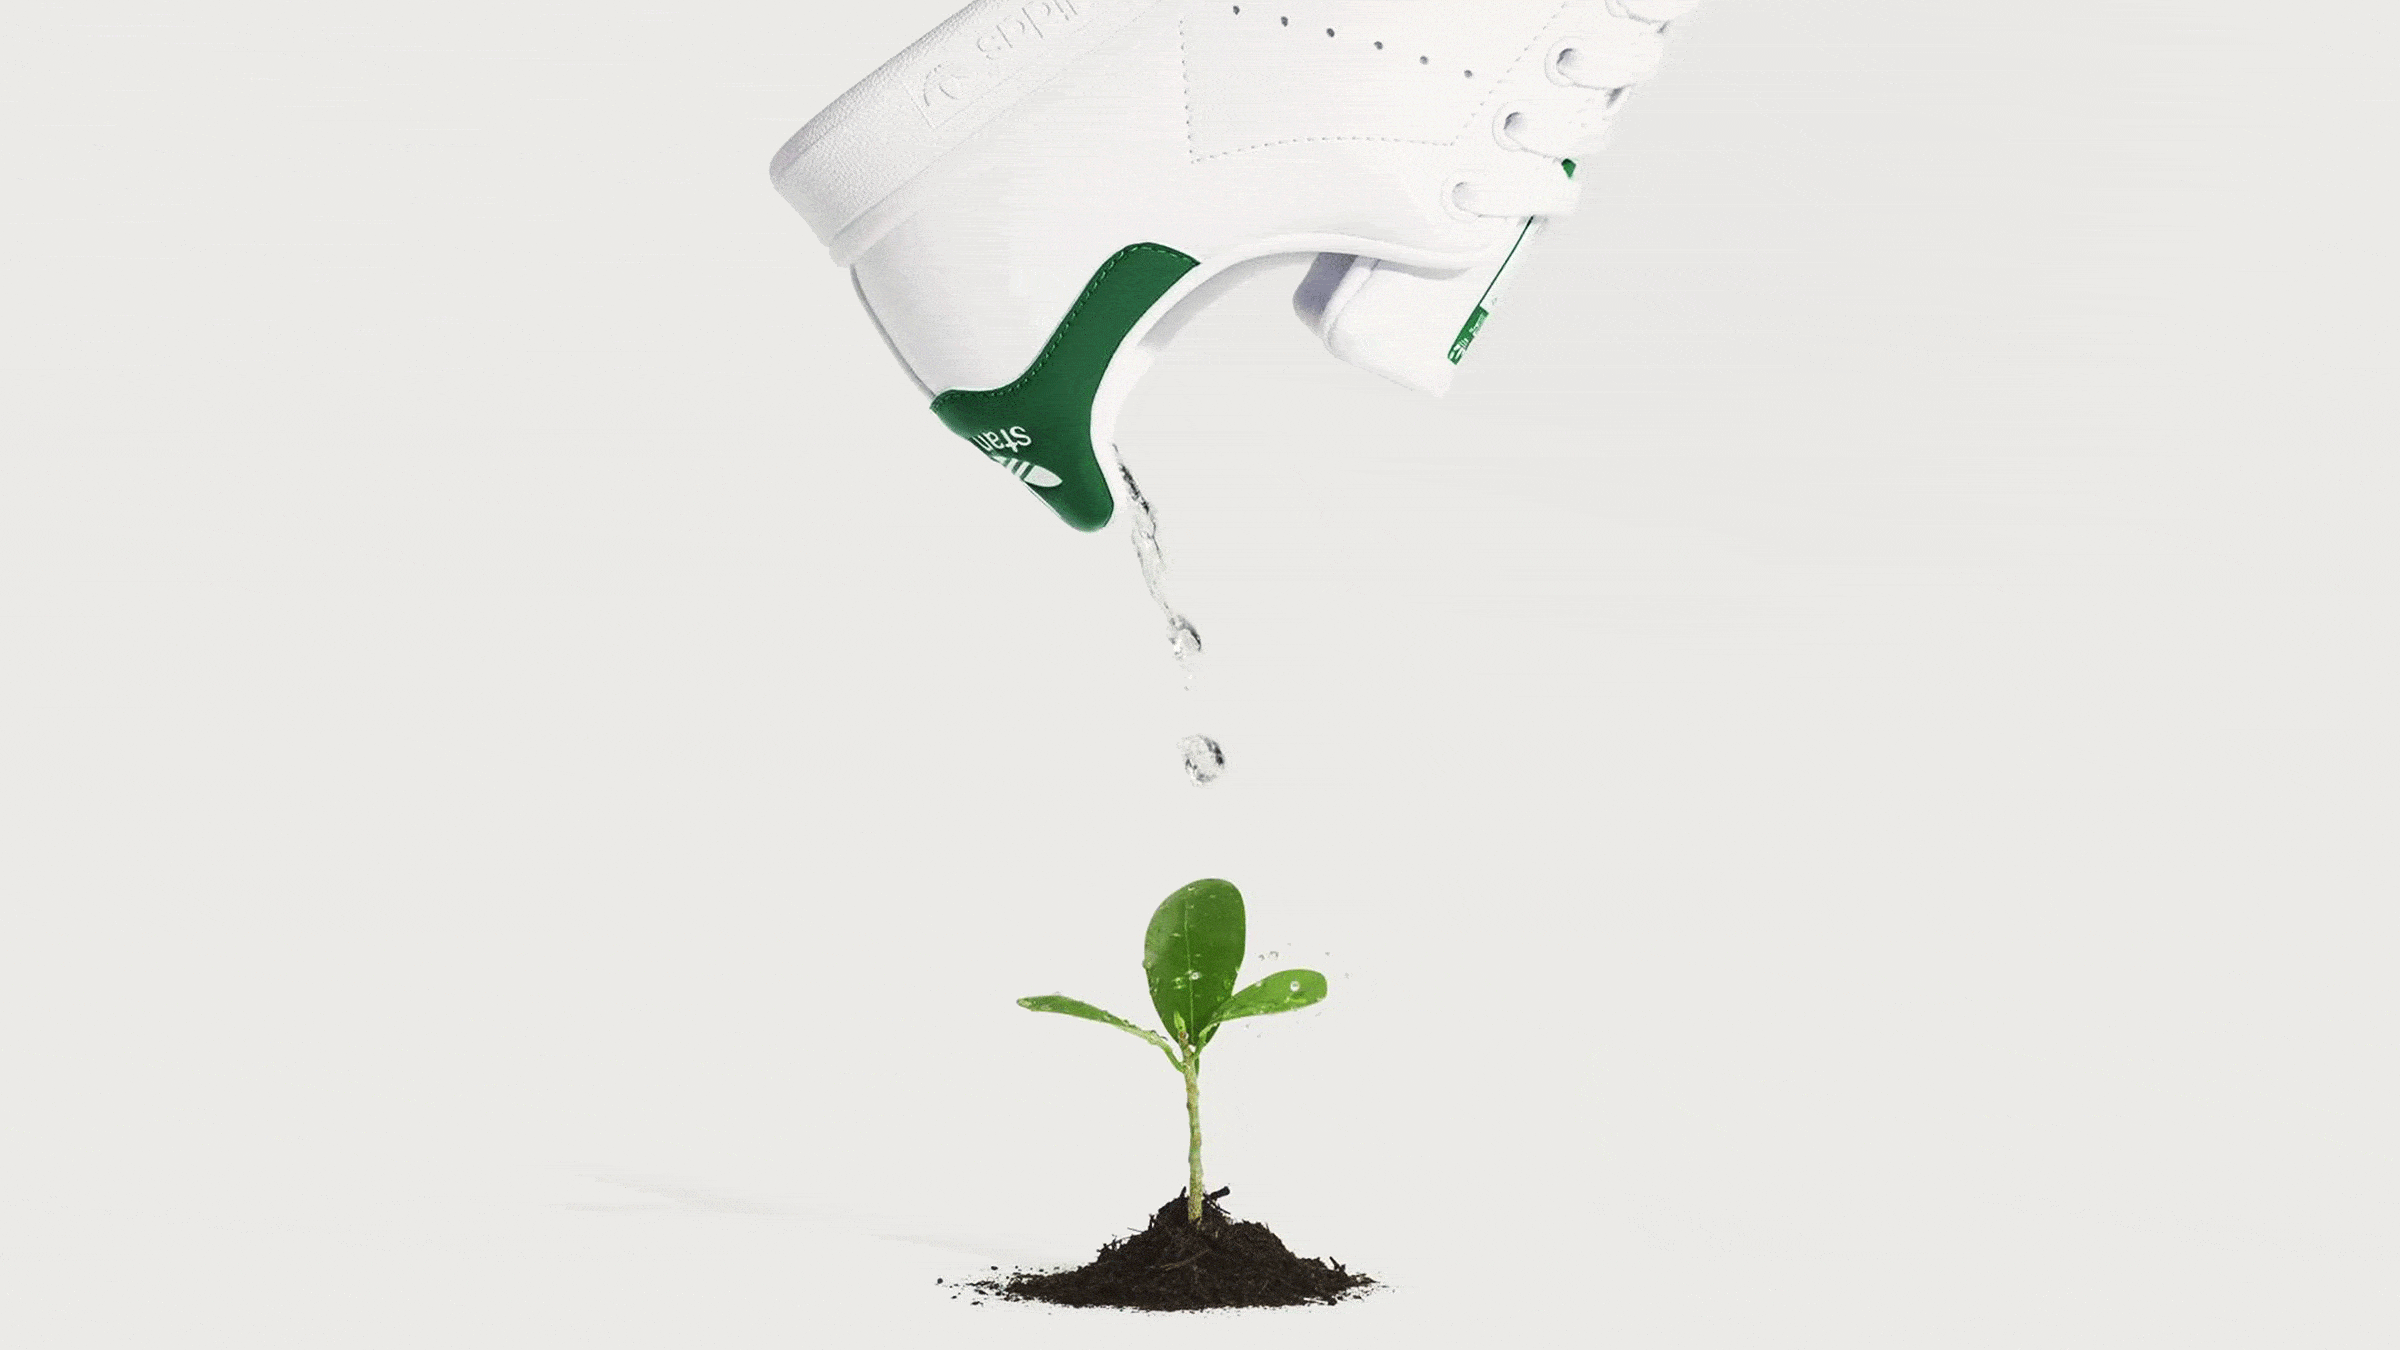 An Adidas Stan Smith trainer hovering above a sprouting plant